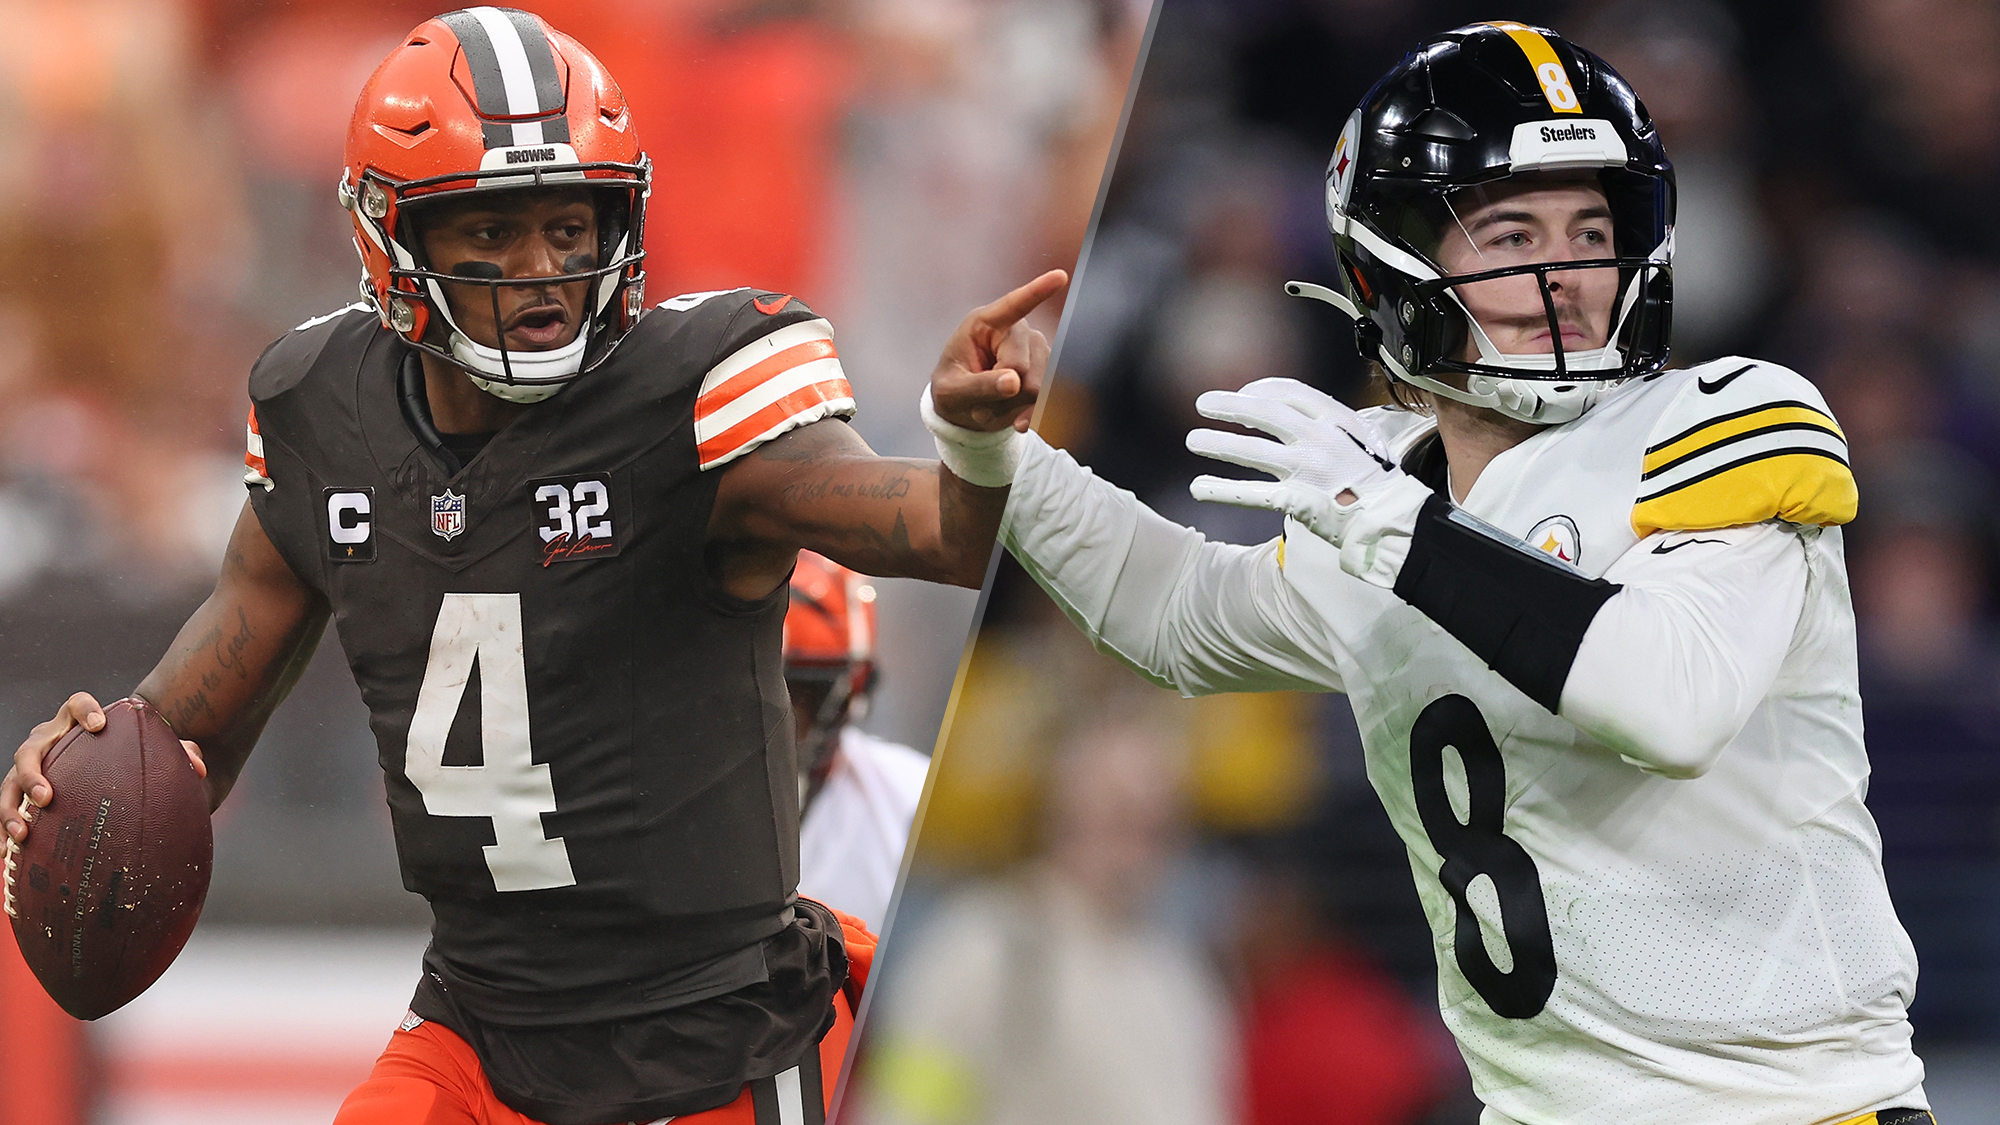 Browns vs Steelers live stream: How to watch Monday Night Football